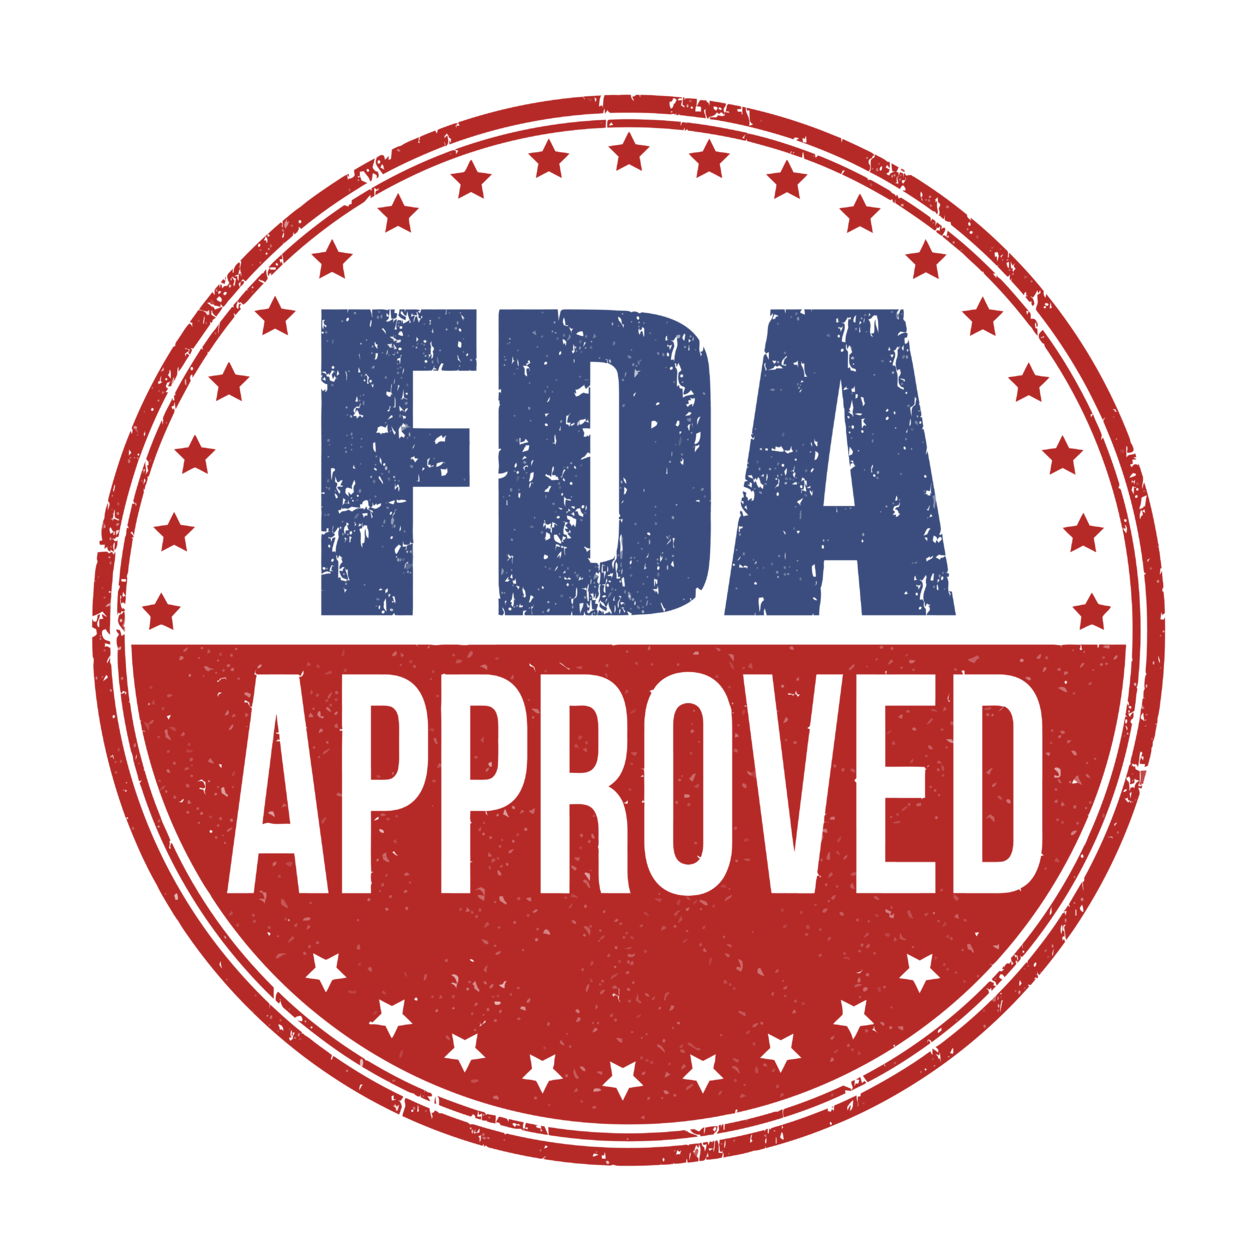 FDA Drug Approvals Report for 2019 Highlights New Treatments for Rare Diseases